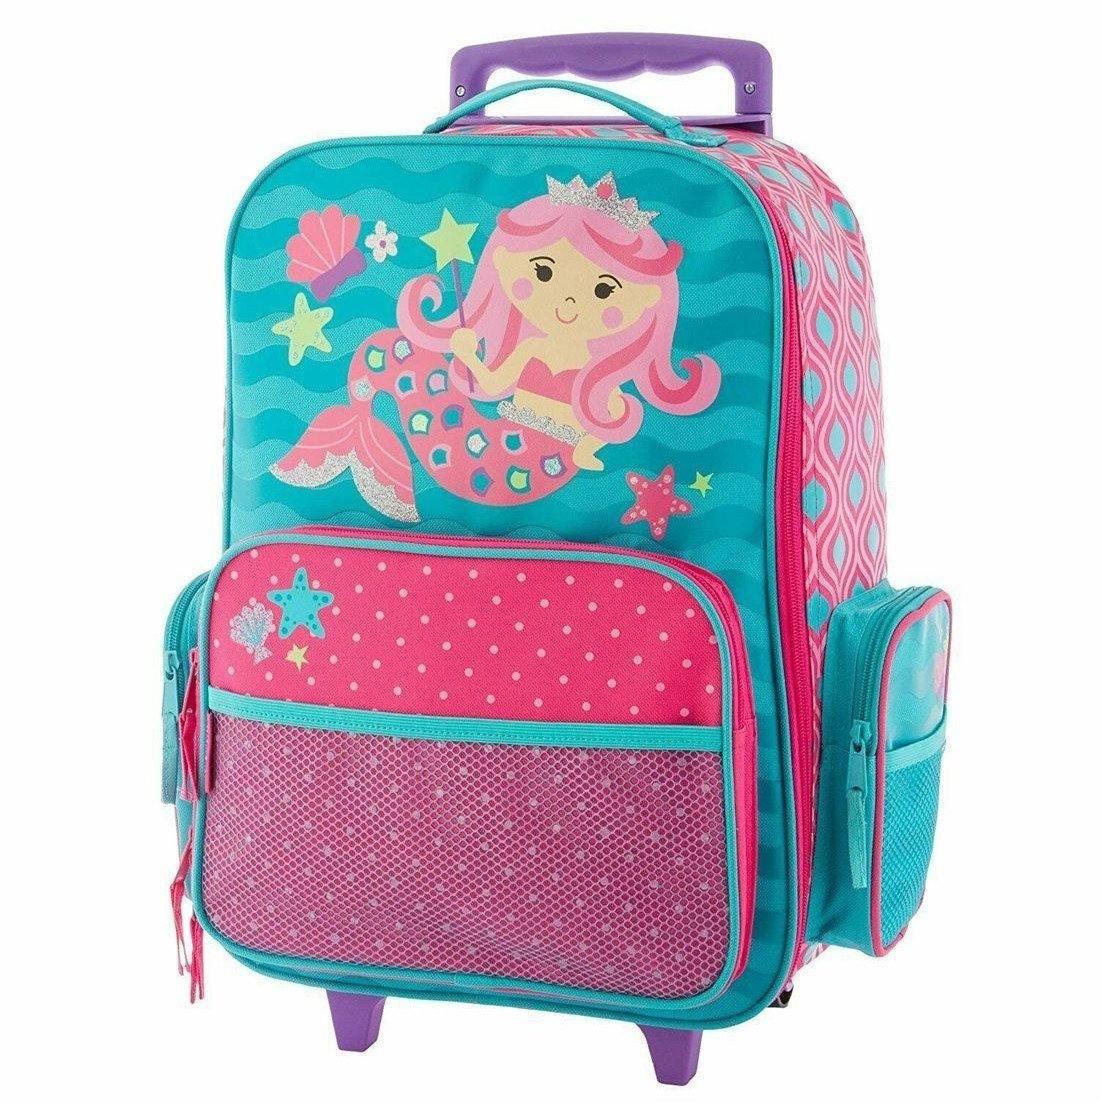 Stephen Joseph Classic Rolling Luggage 18 inch Mermaid - BumbleToys - 5-7 Years, Backpack, Cecil, Girls, Pre-Order, School Supplies